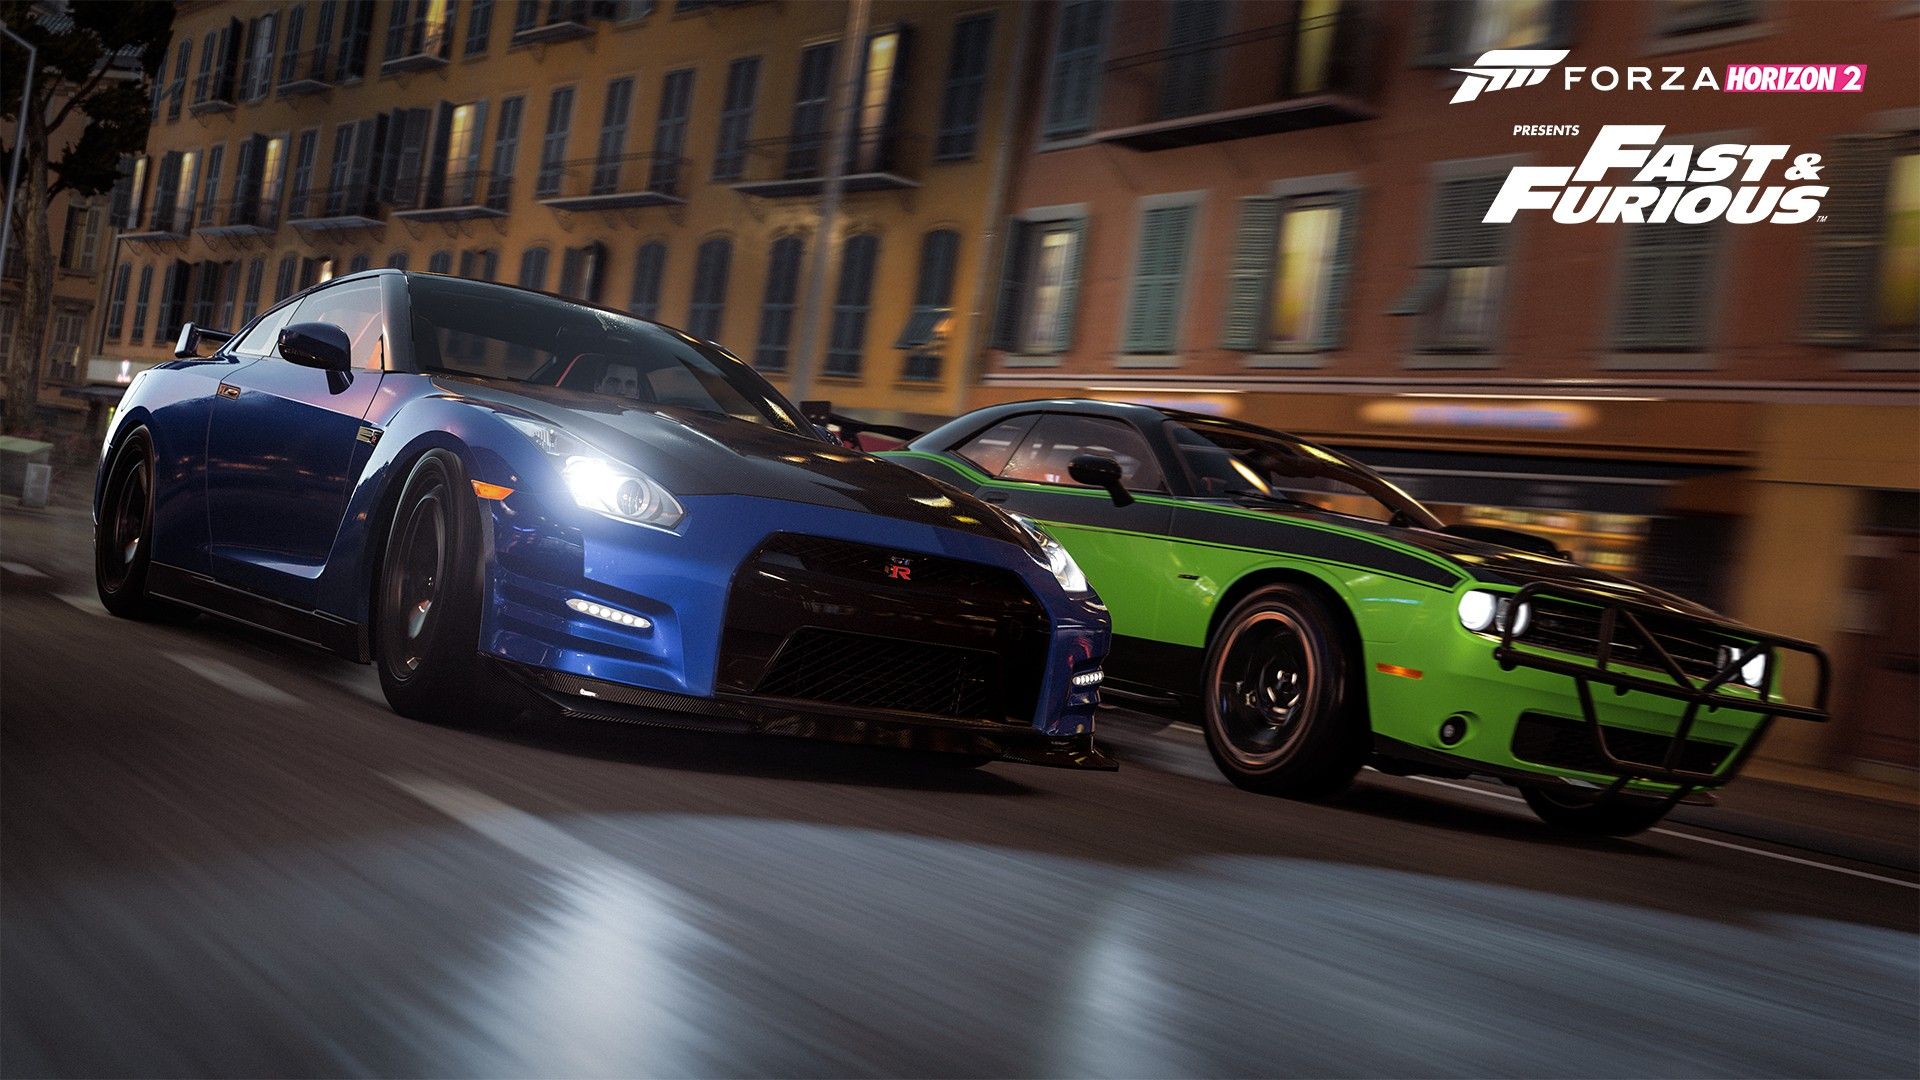 Wallpaper, video games, sports car, Fast and Furious, Nissan GT R, Forza Horizon coupe, performance car, wheel, supercar, land vehicle, automotive design, automobile make, luxury vehicle 1920x1080